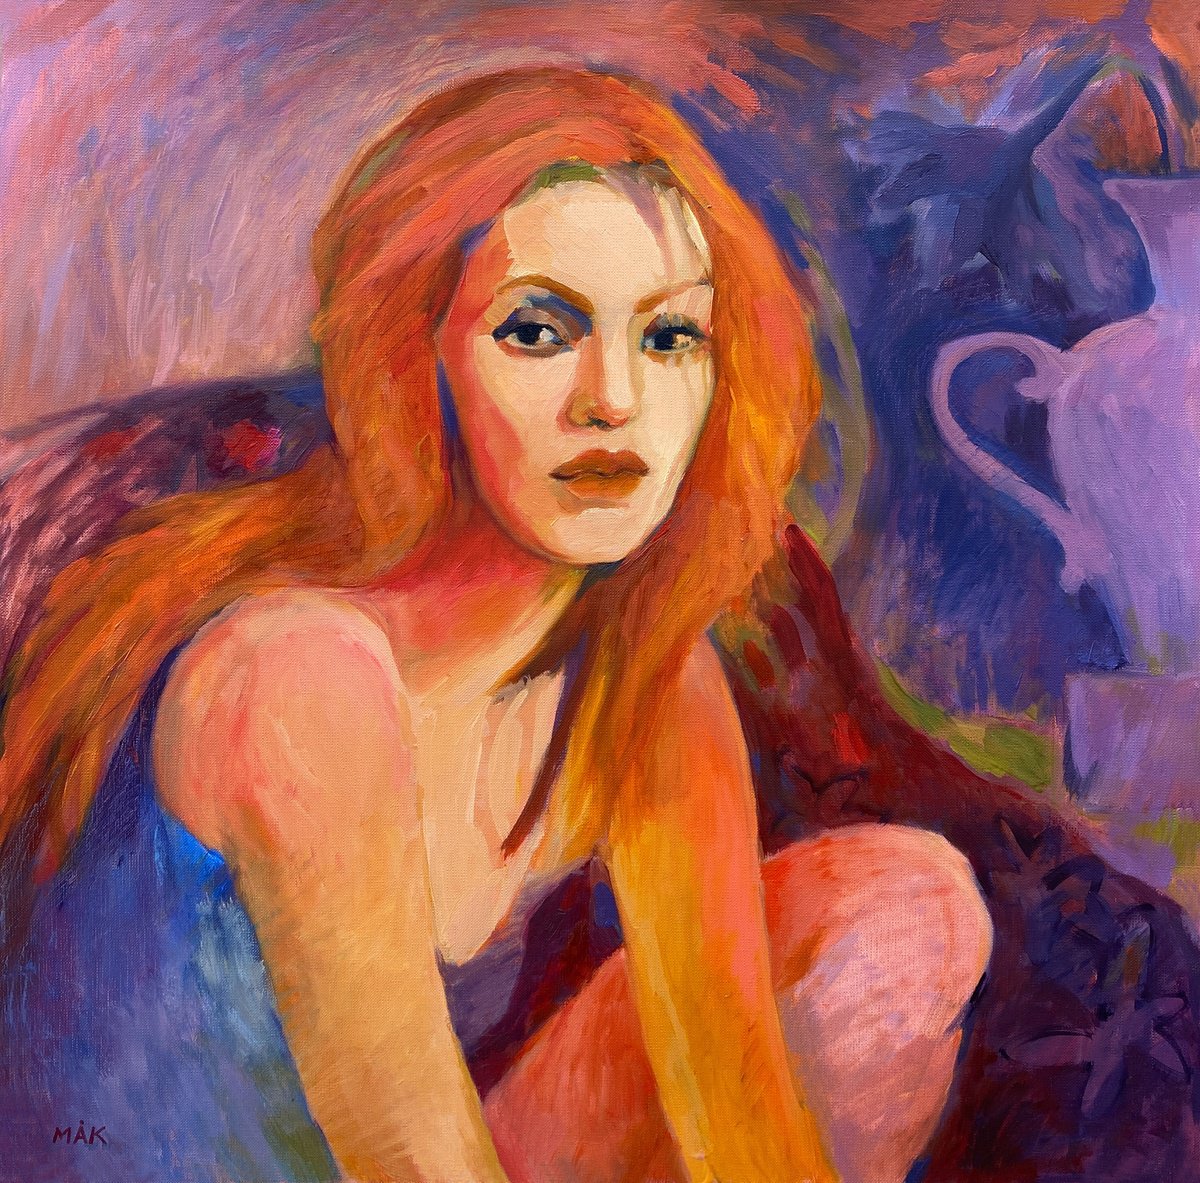 WOMAN’S PORTRAIT - violet & ginger wall art with a female figure by Irene Makarova